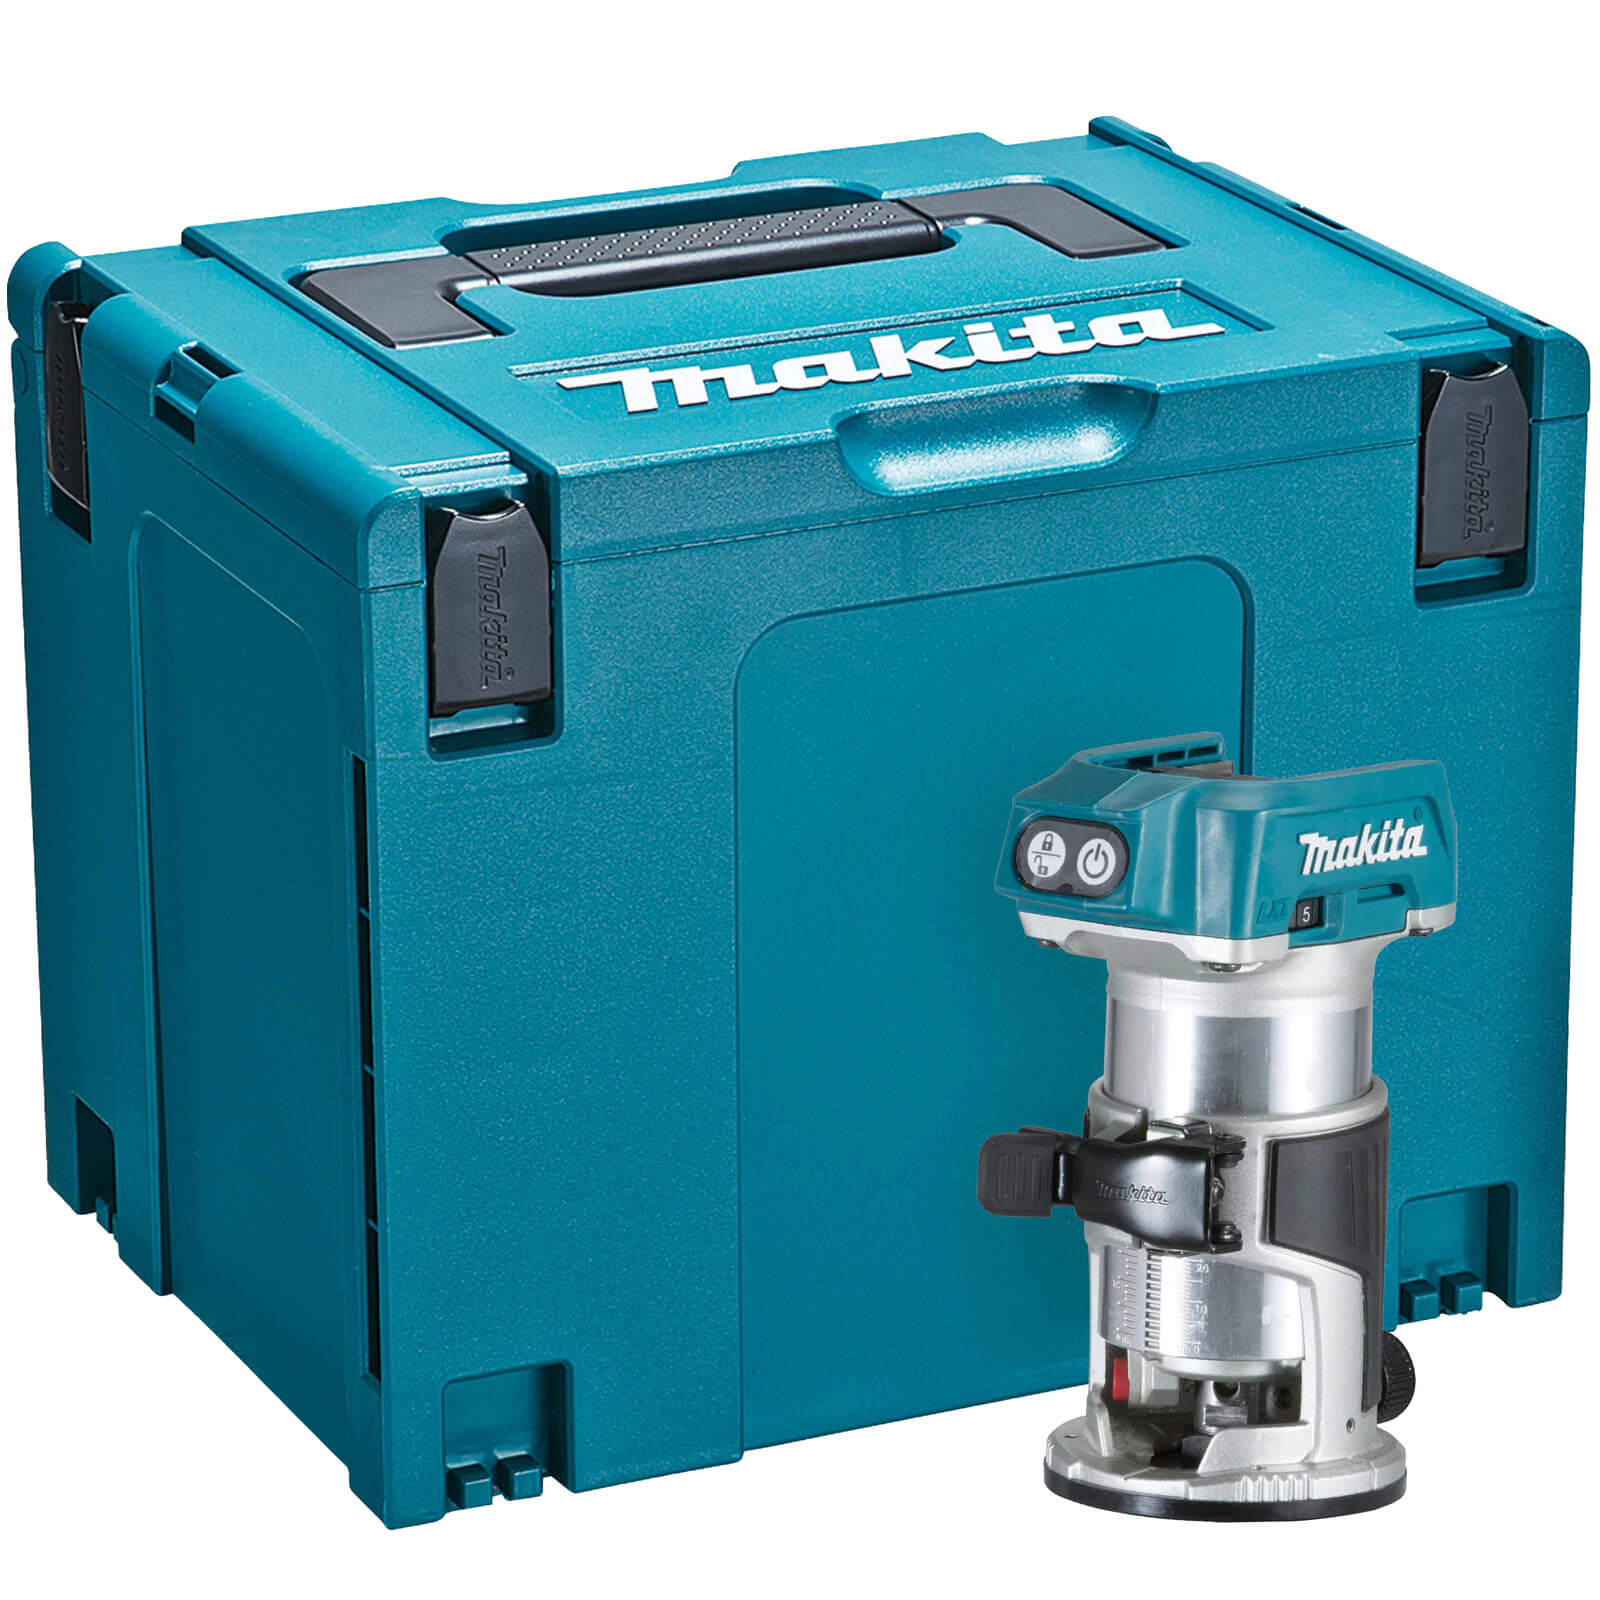 Image of Makita DRT50 18v LXT Cordless Brushless Router Trimmer No Batteries No Charger Case